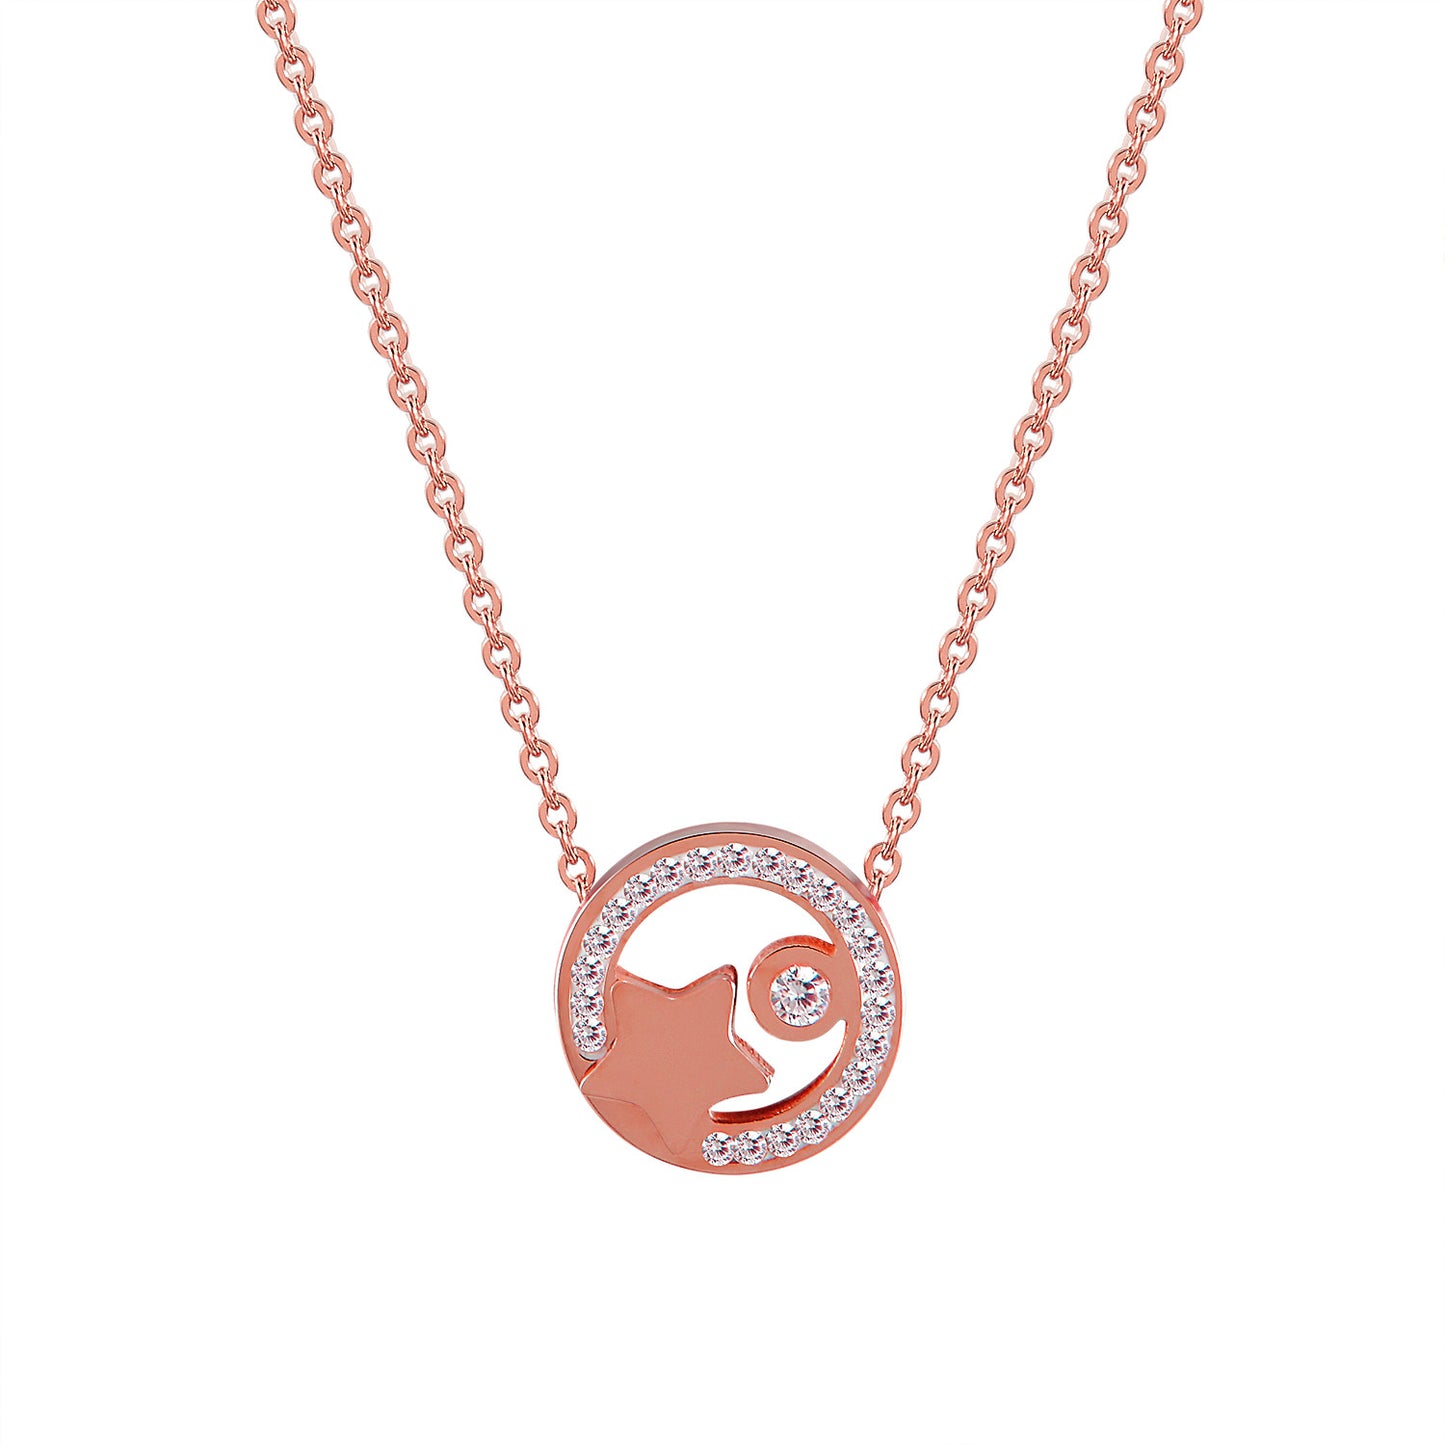 Star Solitaire Choker Chain Charm Rose Gold Stainless Steel Simulated Diamond Women